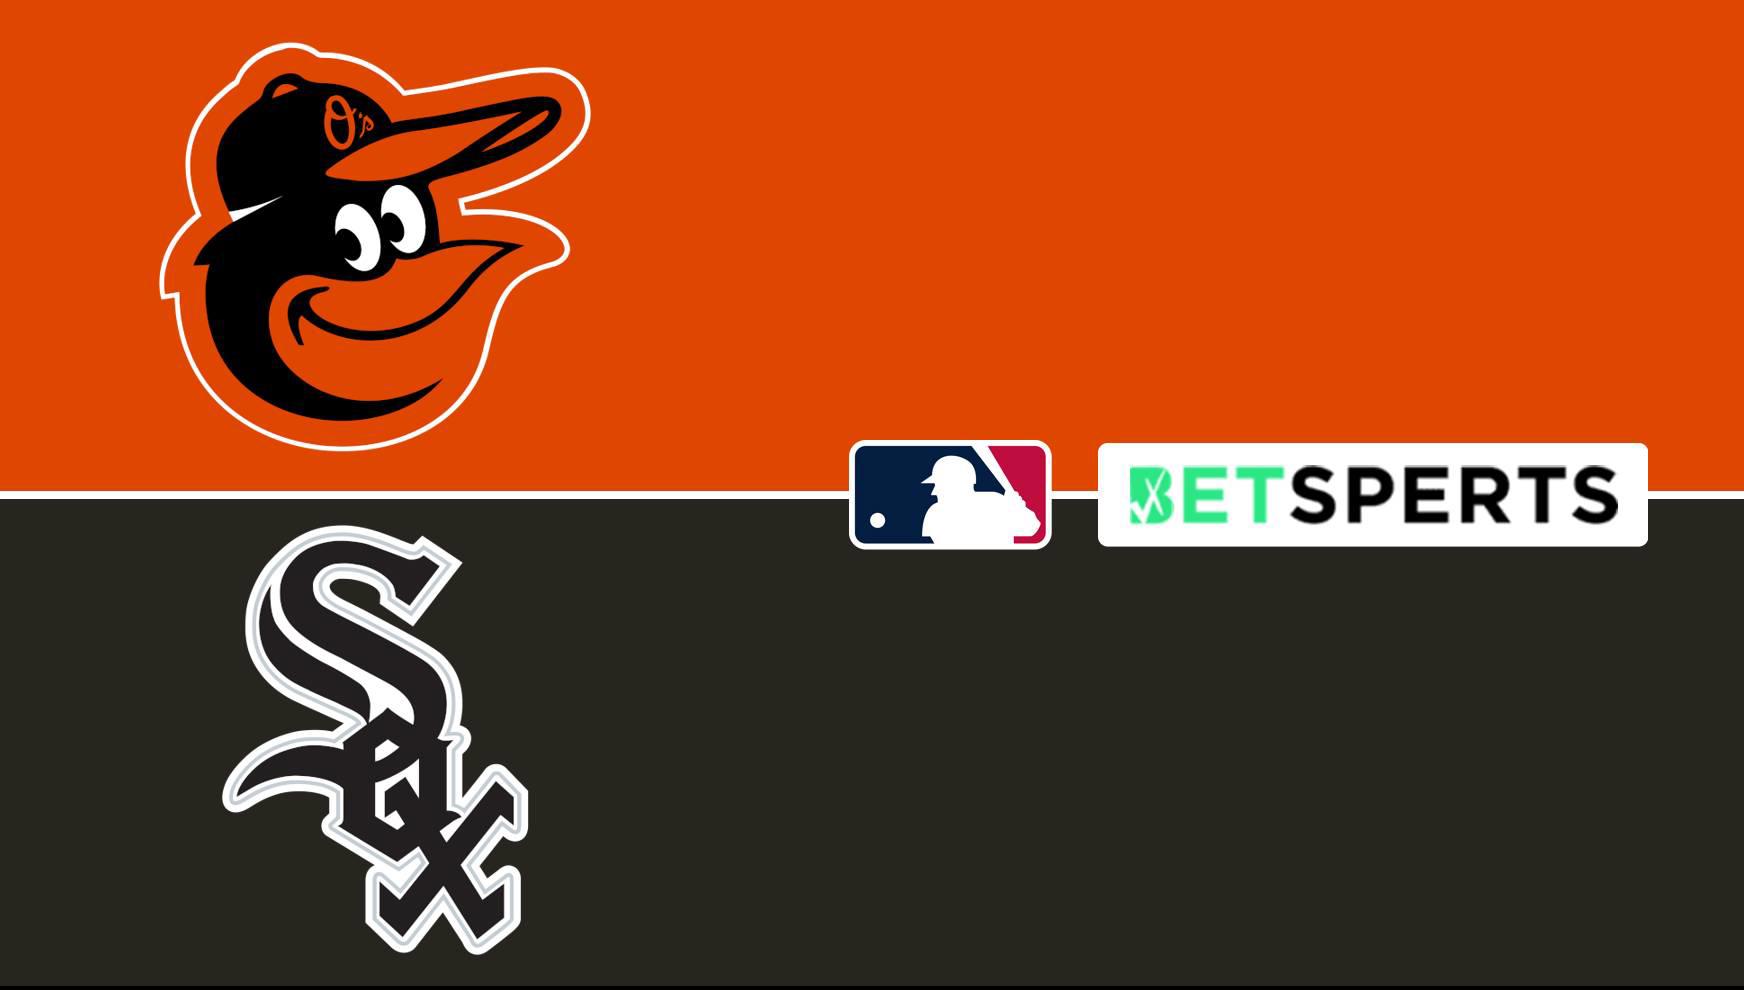 White Sox vs. Orioles odds, tips and betting trends